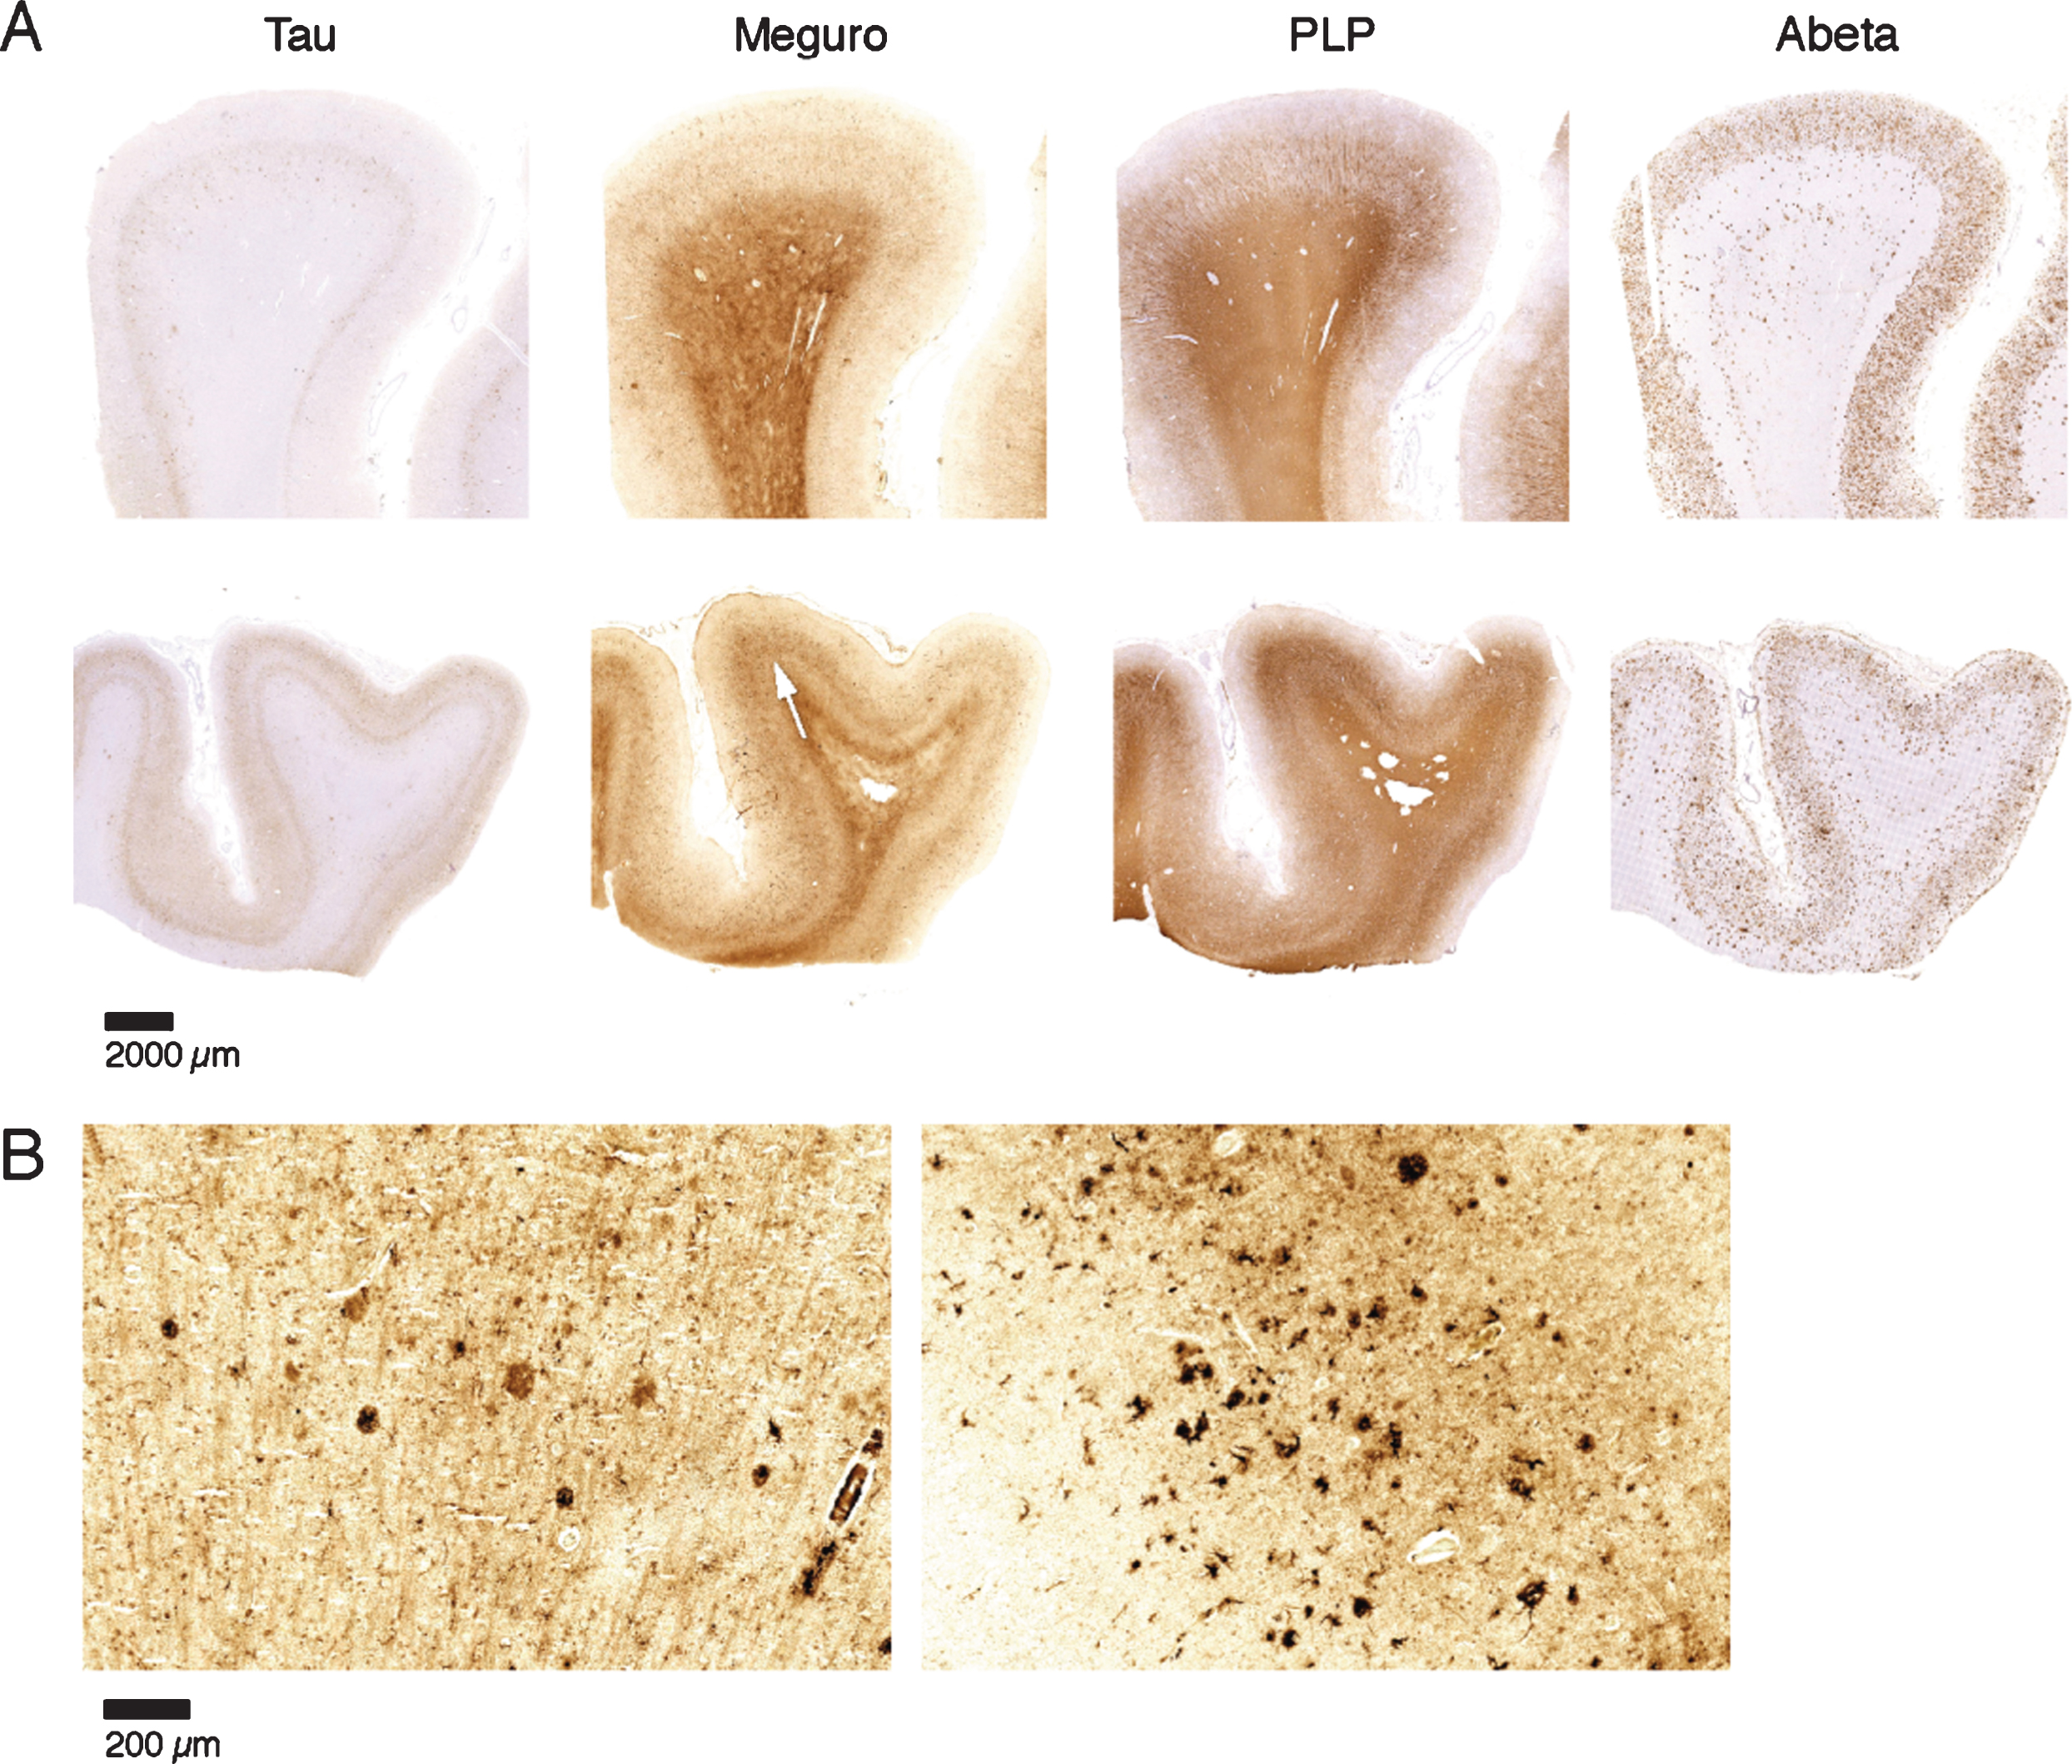 Iron accumulation in AD, related to tau pathology and Aβ plaques. A) Both patients (first and second row) show similar amounts of Aβ plaques but only the tissue with the most severe tau pathology shows a diffuse band shaped increase of iron/PLP labelling in the middle cortical layers (arrows). B) 20 μm sections of the same blocks. Cortex with the most severe tau pathology shows more iron accumulation in plaques and microglia.